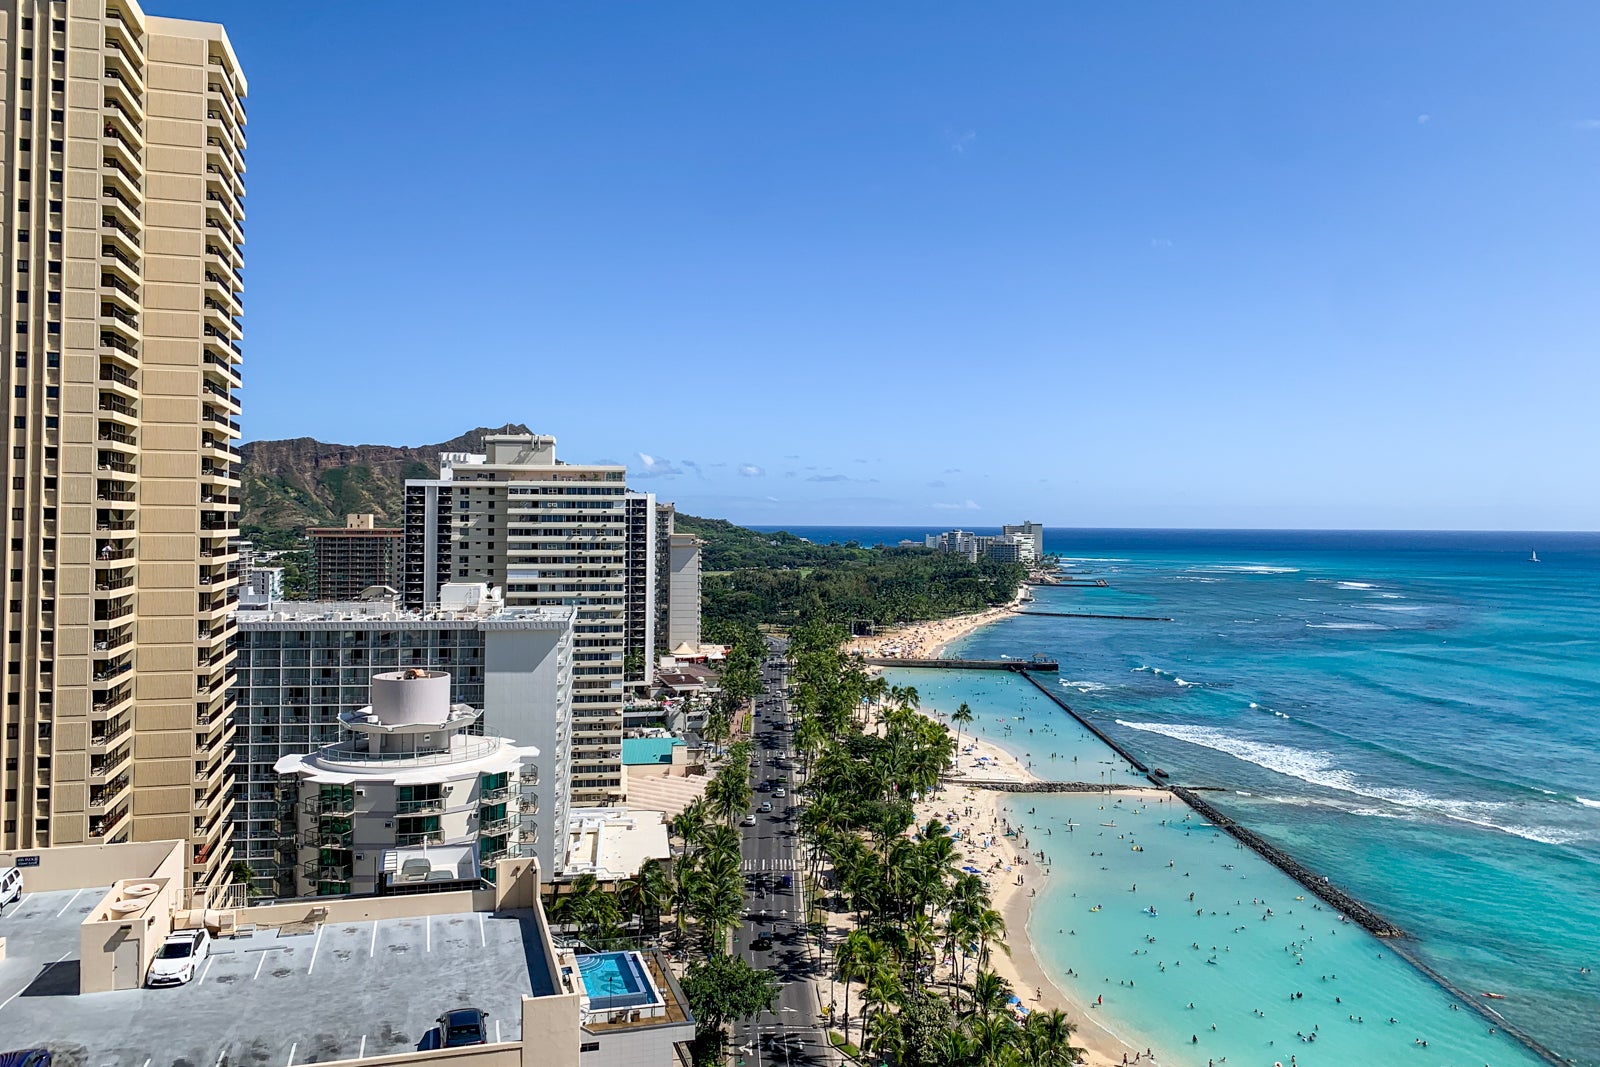 Fly from LA to Honolulu for $200 round trip